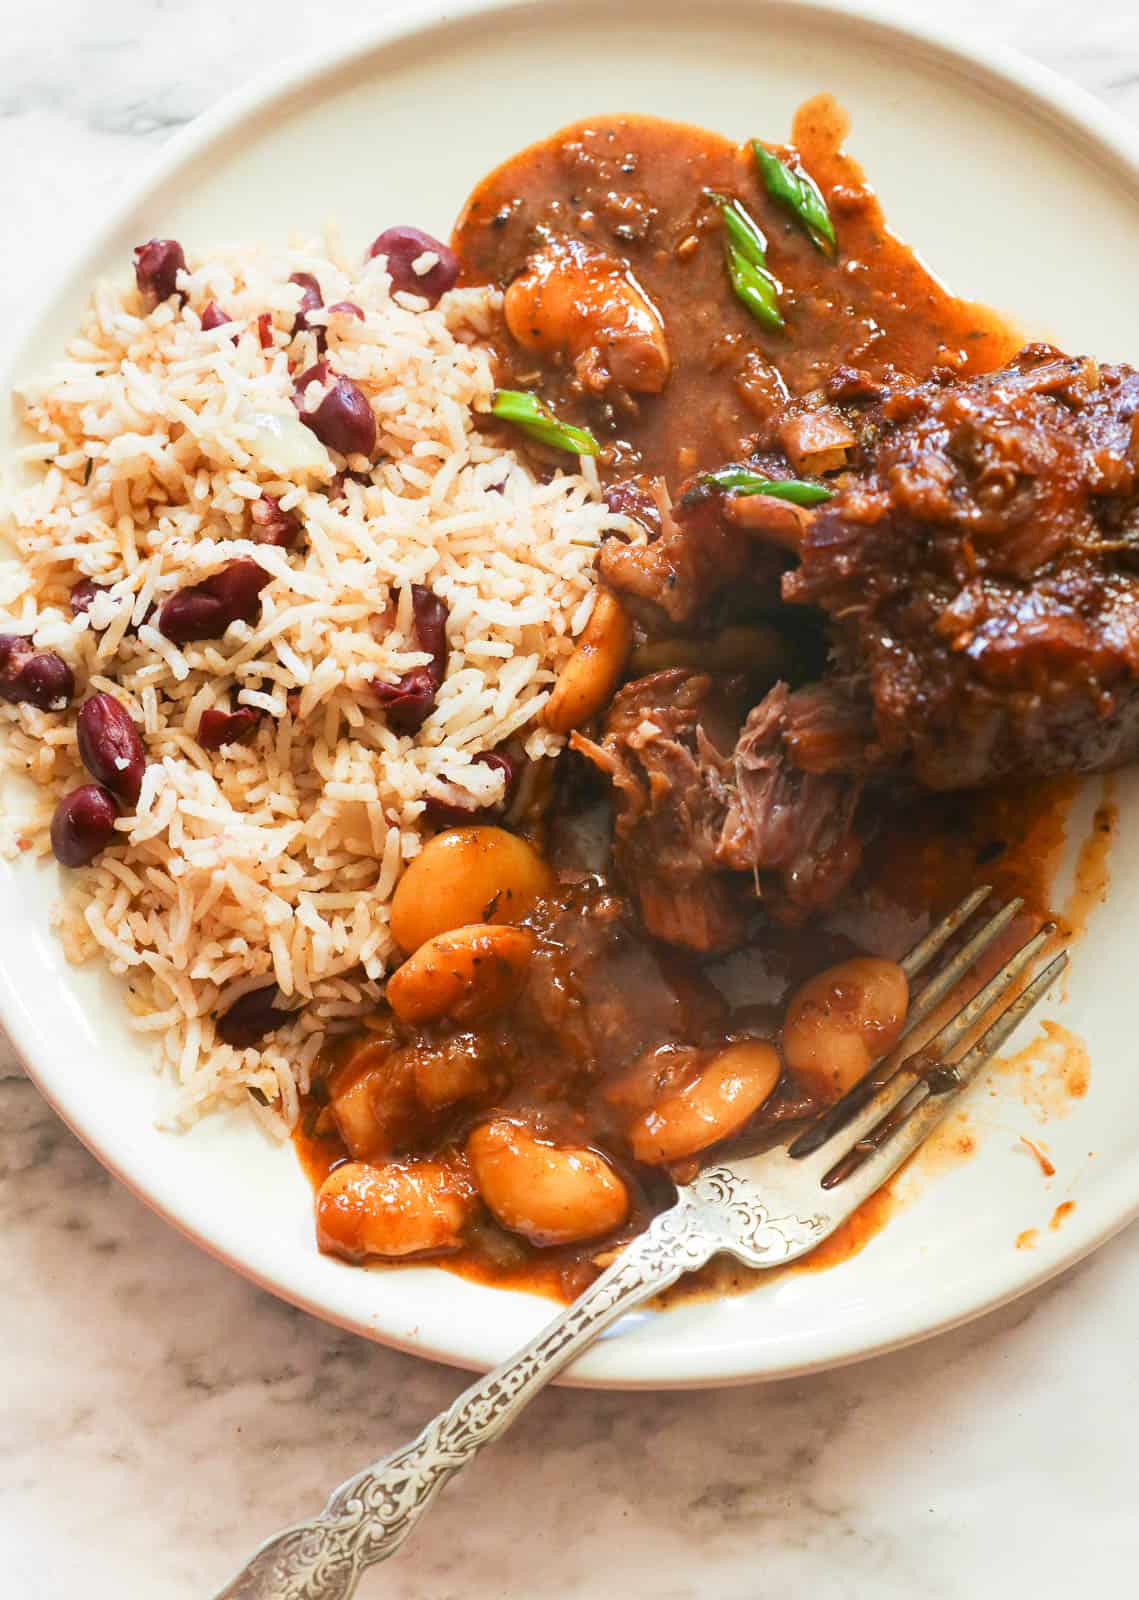 Jamaican oxtail stew served with Caribbean rice and beans